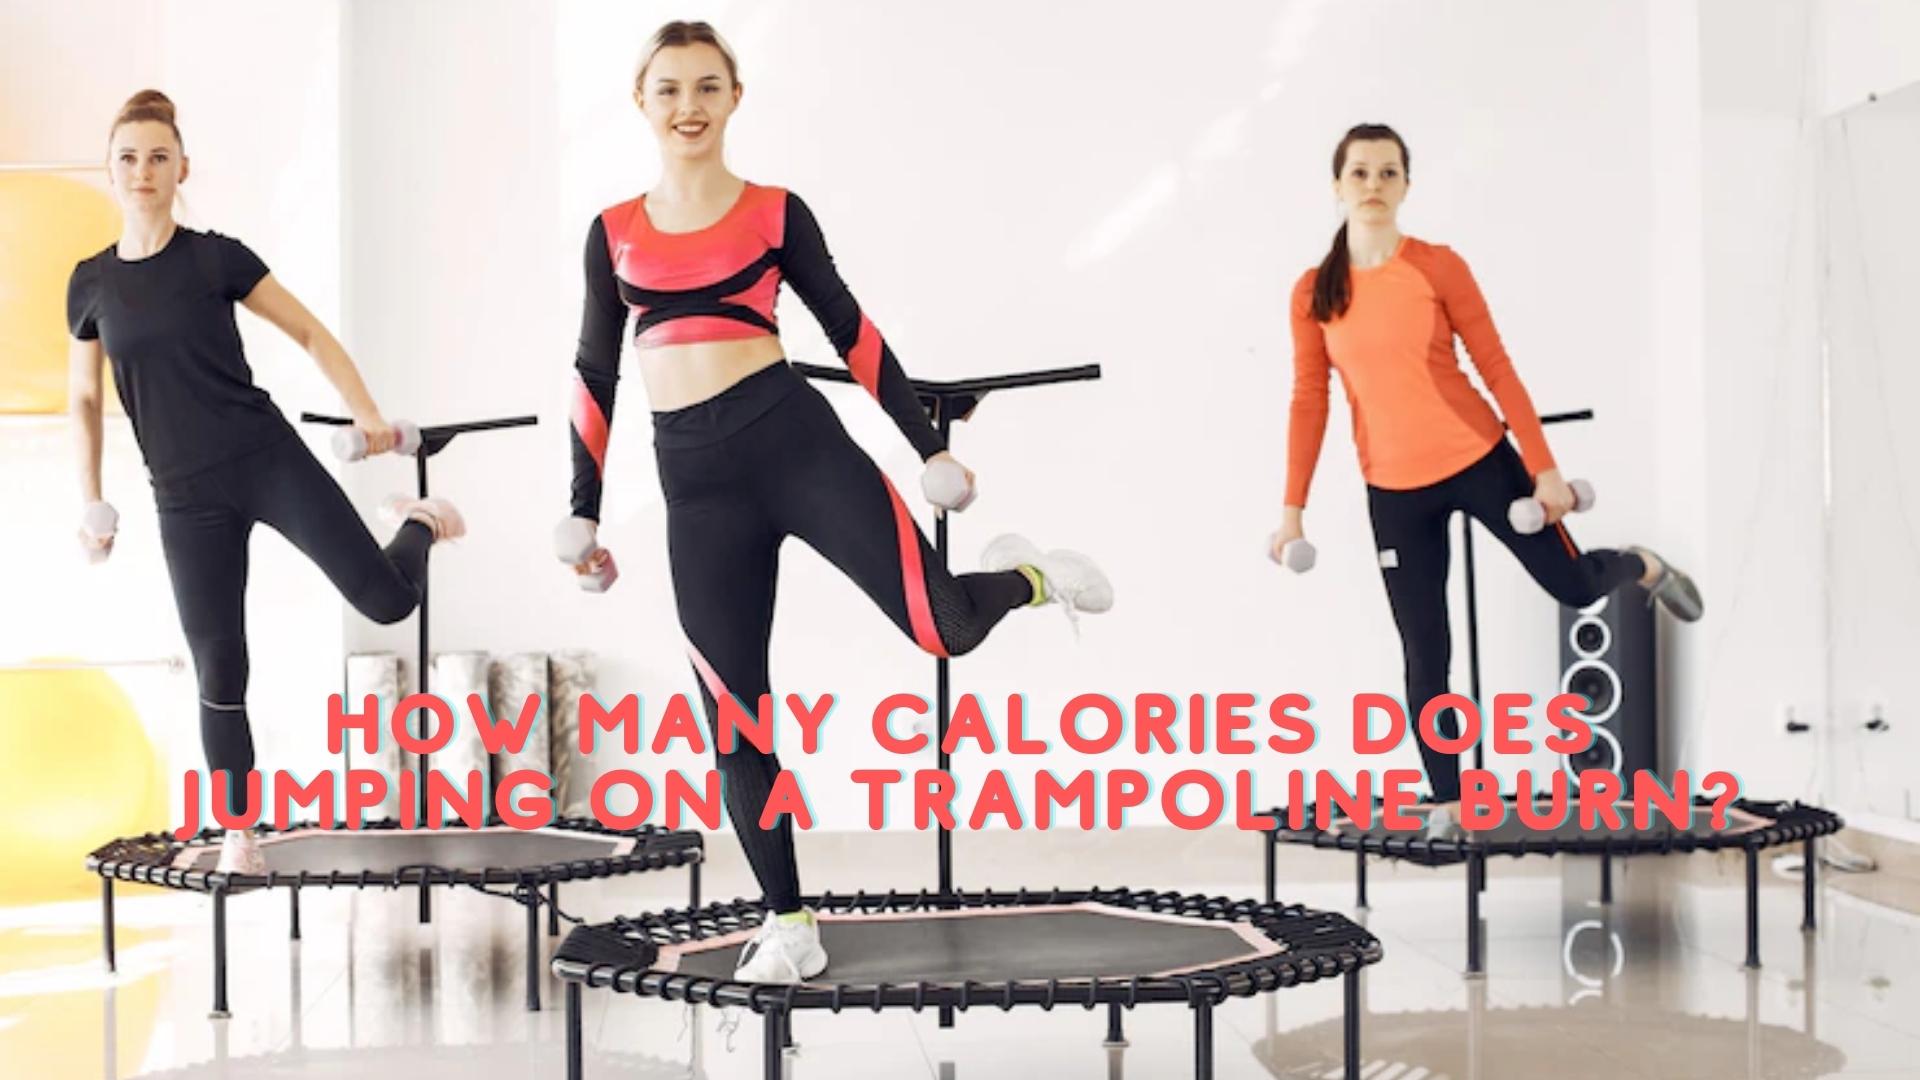 Adviseren bom Scheiden How Many Calories Does Jumping On A Trampoline Burn? Detailed Instructions